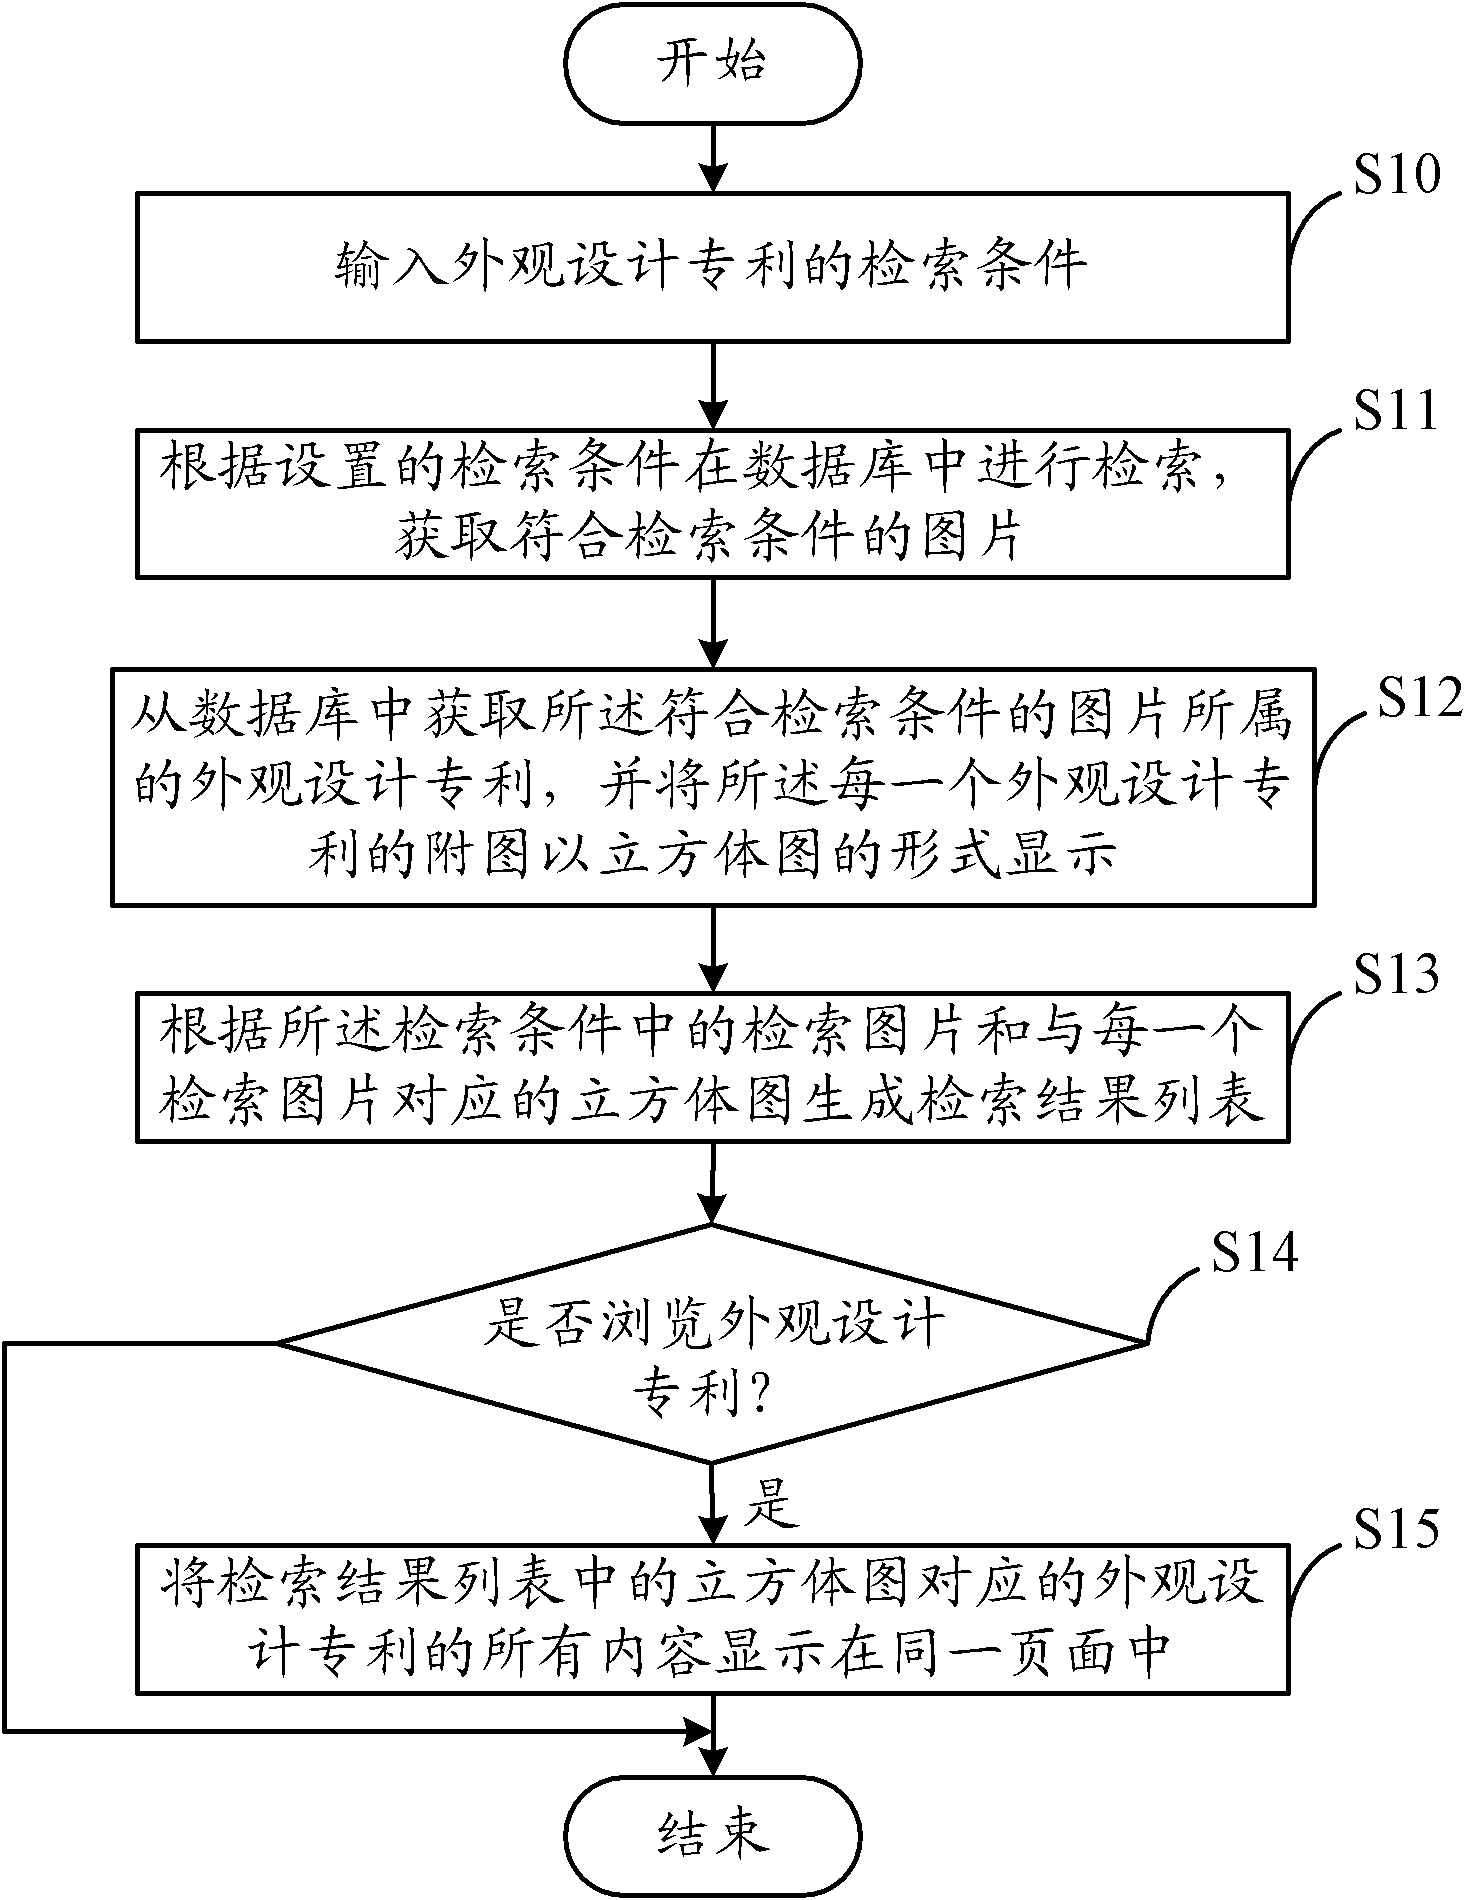 Design patent display system and method